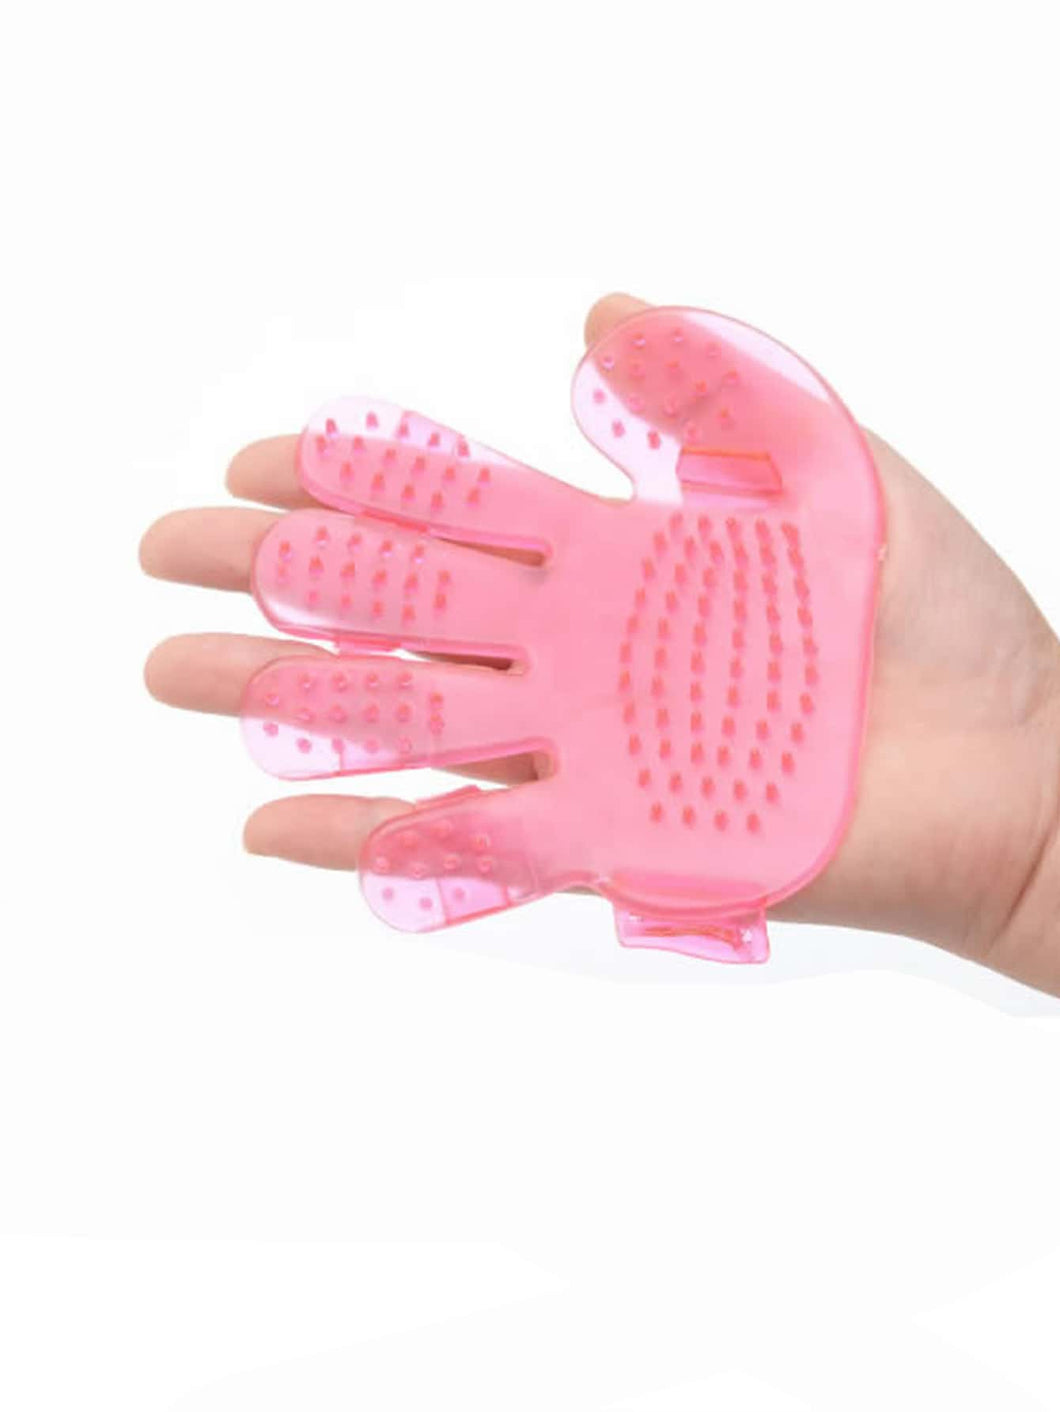 'Dog Grooming Clear Bath Massage Brush' Clear glove brush to pamper your friend pet and remove unwanted hair. Colour: Pink Pattern Type: Plain Material: Rubber Applicable Pet: Cat/Dog